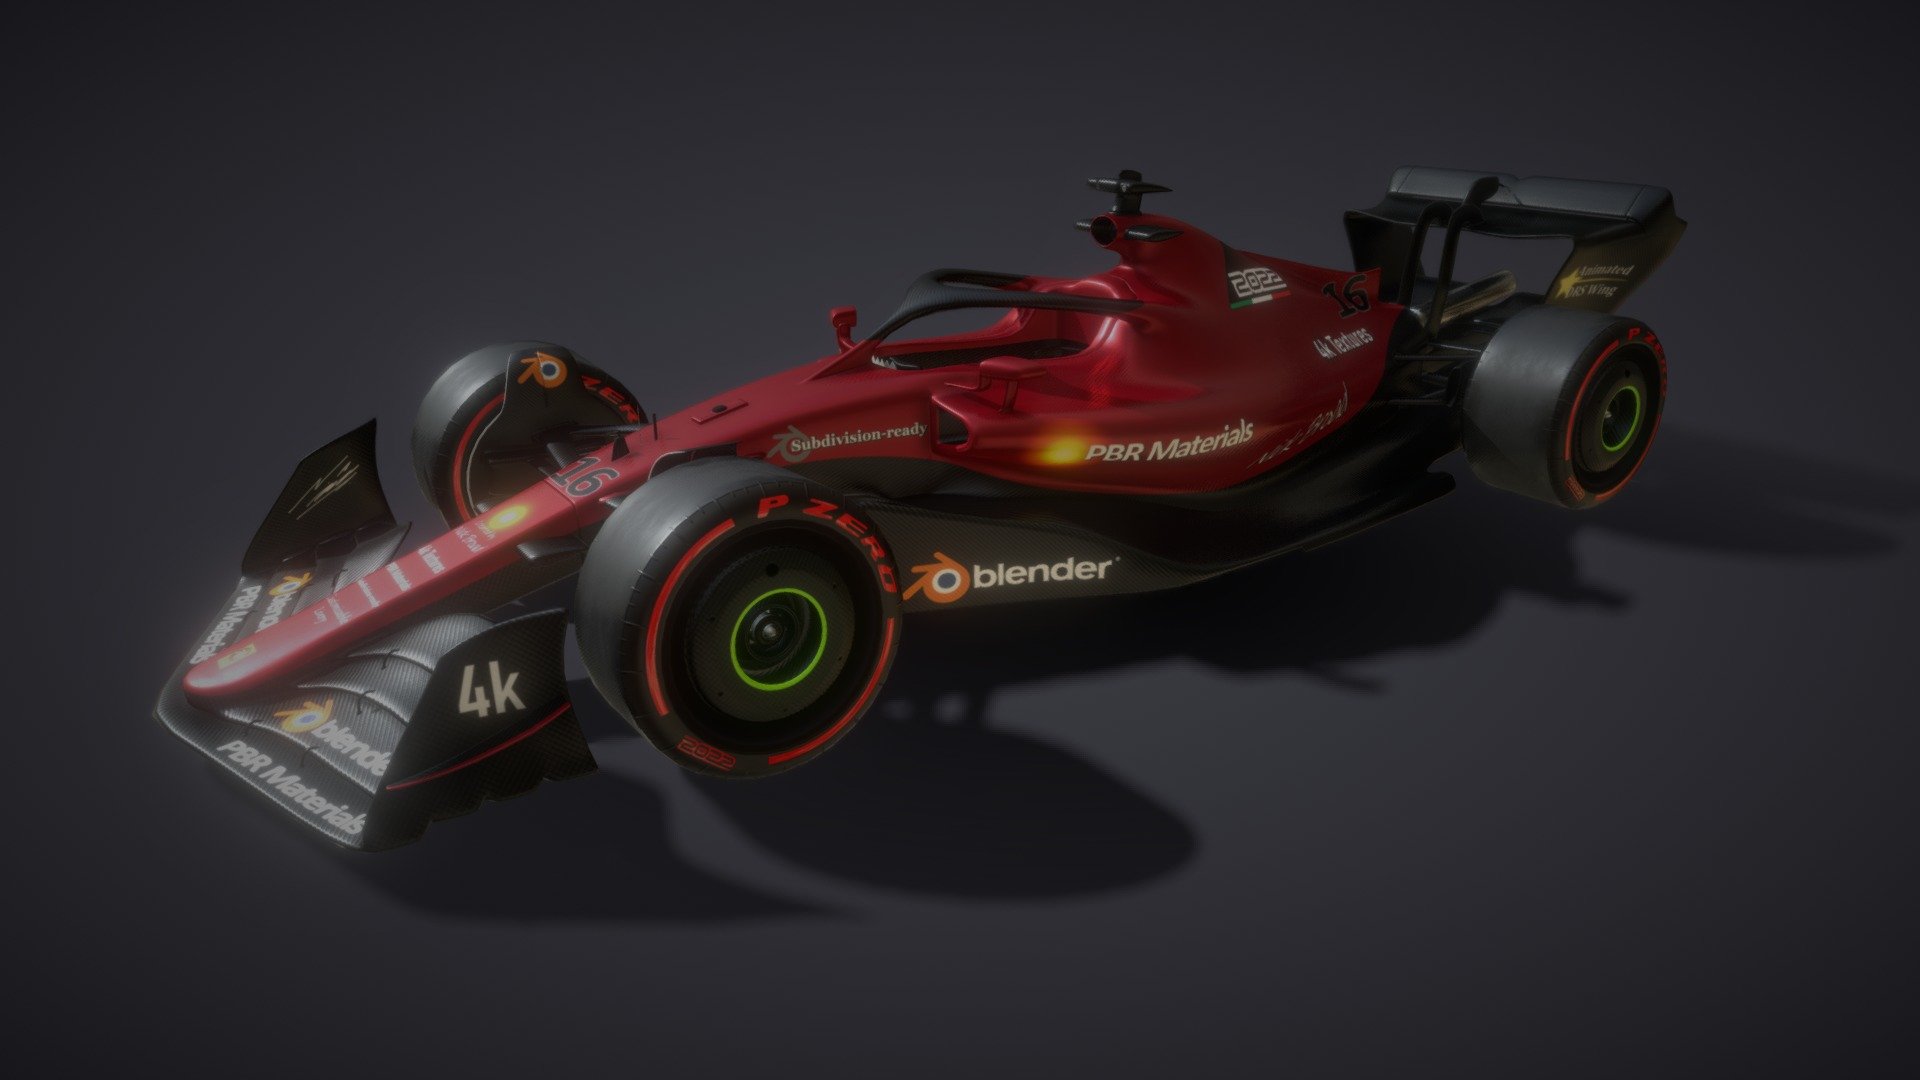 Royalty free Formula 1 car modelled in stunning detail to accurately represent the new generation of F1 cars for the 2022 season. The model includes a fully rigged and animated DRS rear wing, removable wheels and removable front wing (see images below). The model is subdivision-ready with 4k textures and the included Photoshop texture files easily allow you to create your own designs. The current design uses a Rosso Red livery and can be customised as you wish using the included texture files.

Additional files include FBX, OBJ and STL exports, along with PSD texture files for creating your own designs, and extra textures for different tyre compounds (soft, medium and hard).

Photoshop layers are clearly labelled to allow you to easily create your own designs:


Blender file is set up for you to immediately start rendering:


Front wing and wheels can be easily removed:
 - F1 2022 Rosso Livery Template - Buy Royalty Free 3D model by Nick Broad (@nickbroad) 3d model